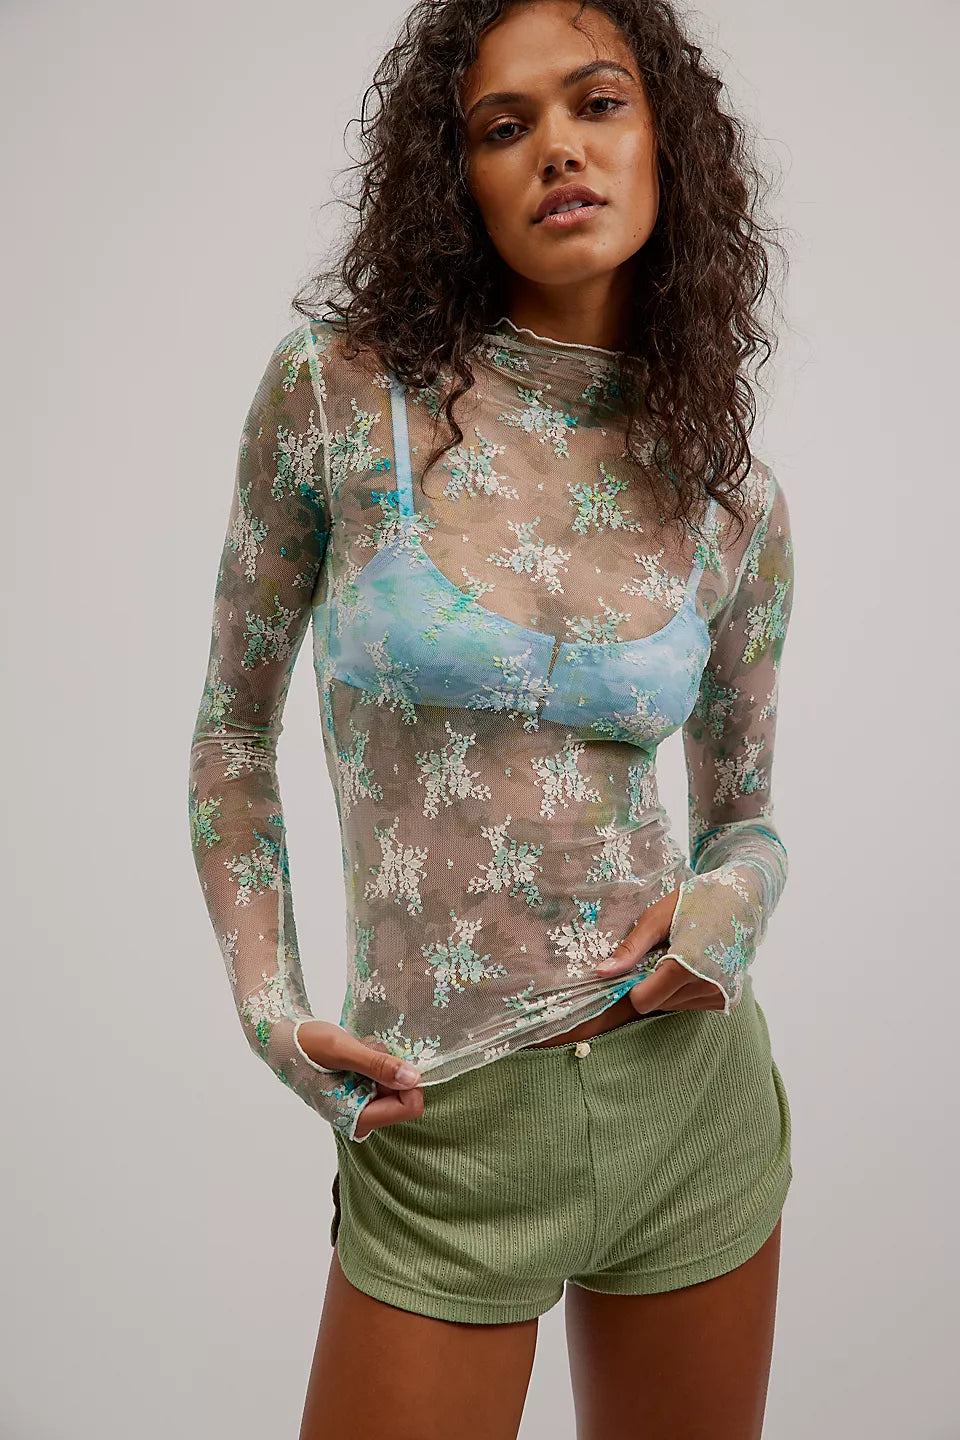 FREE PEOPLE PRINTED LADY LUX LAYERING TOP TEA COMBO